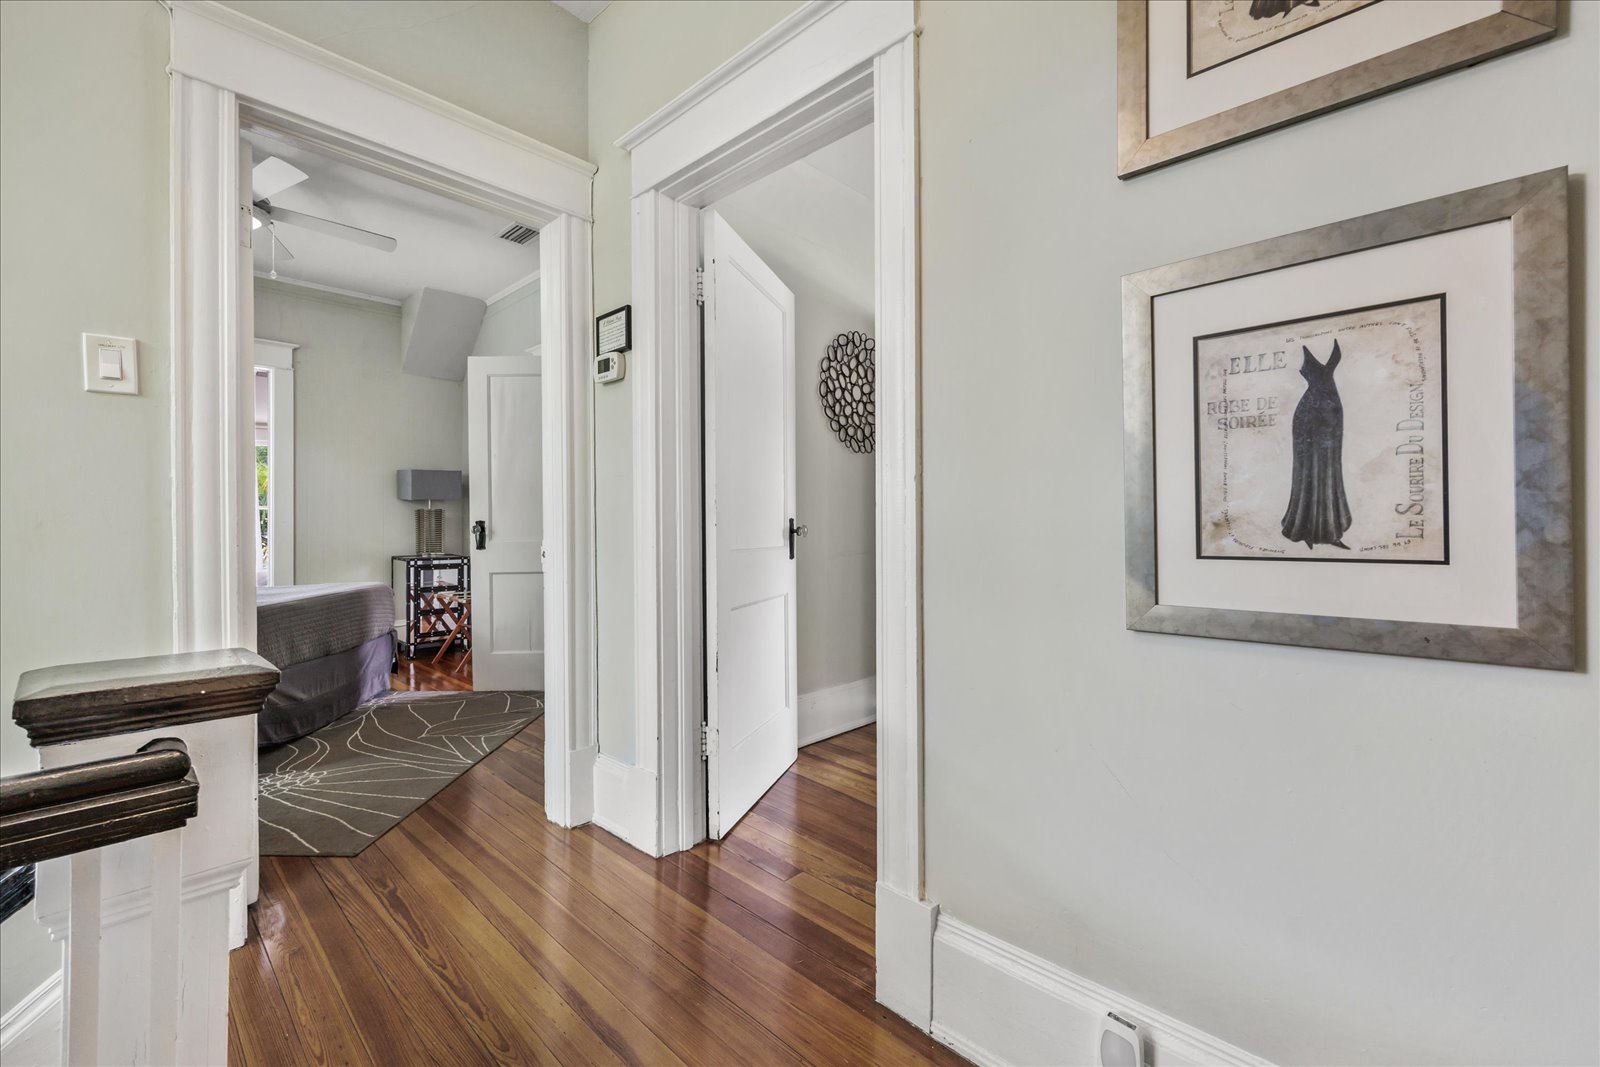 Enjoy the historic details throughout this 2nd floor unit